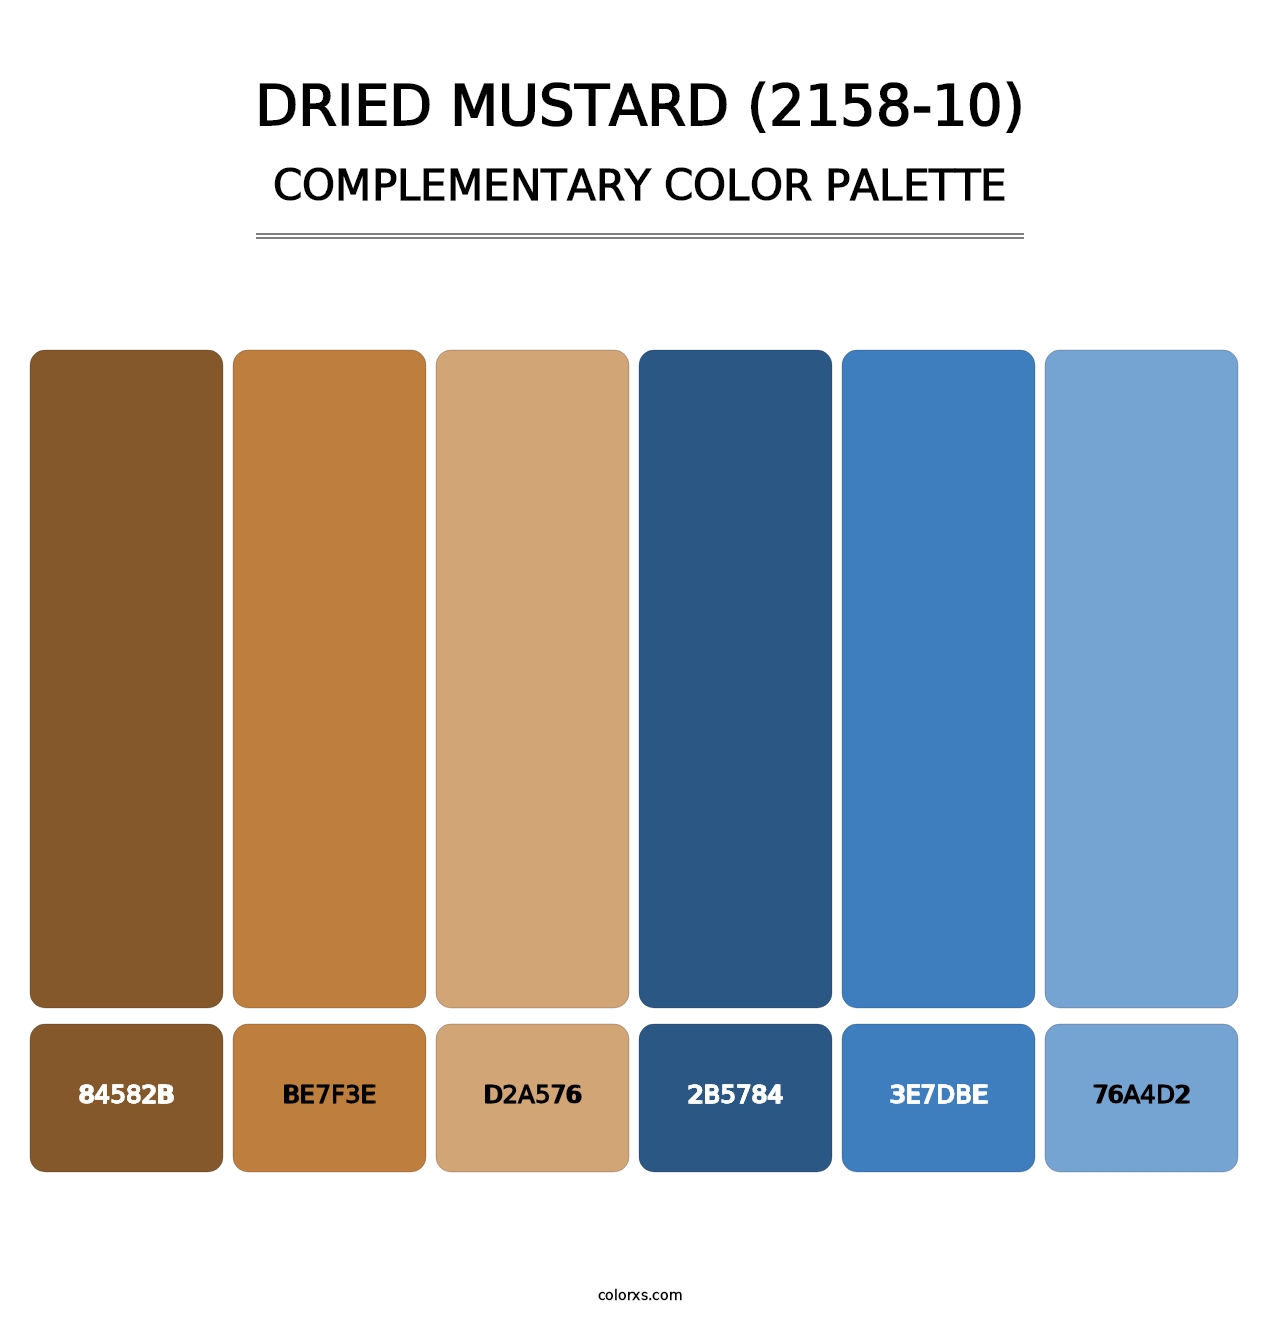 Dried Mustard (2158-10) - Complementary Color Palette